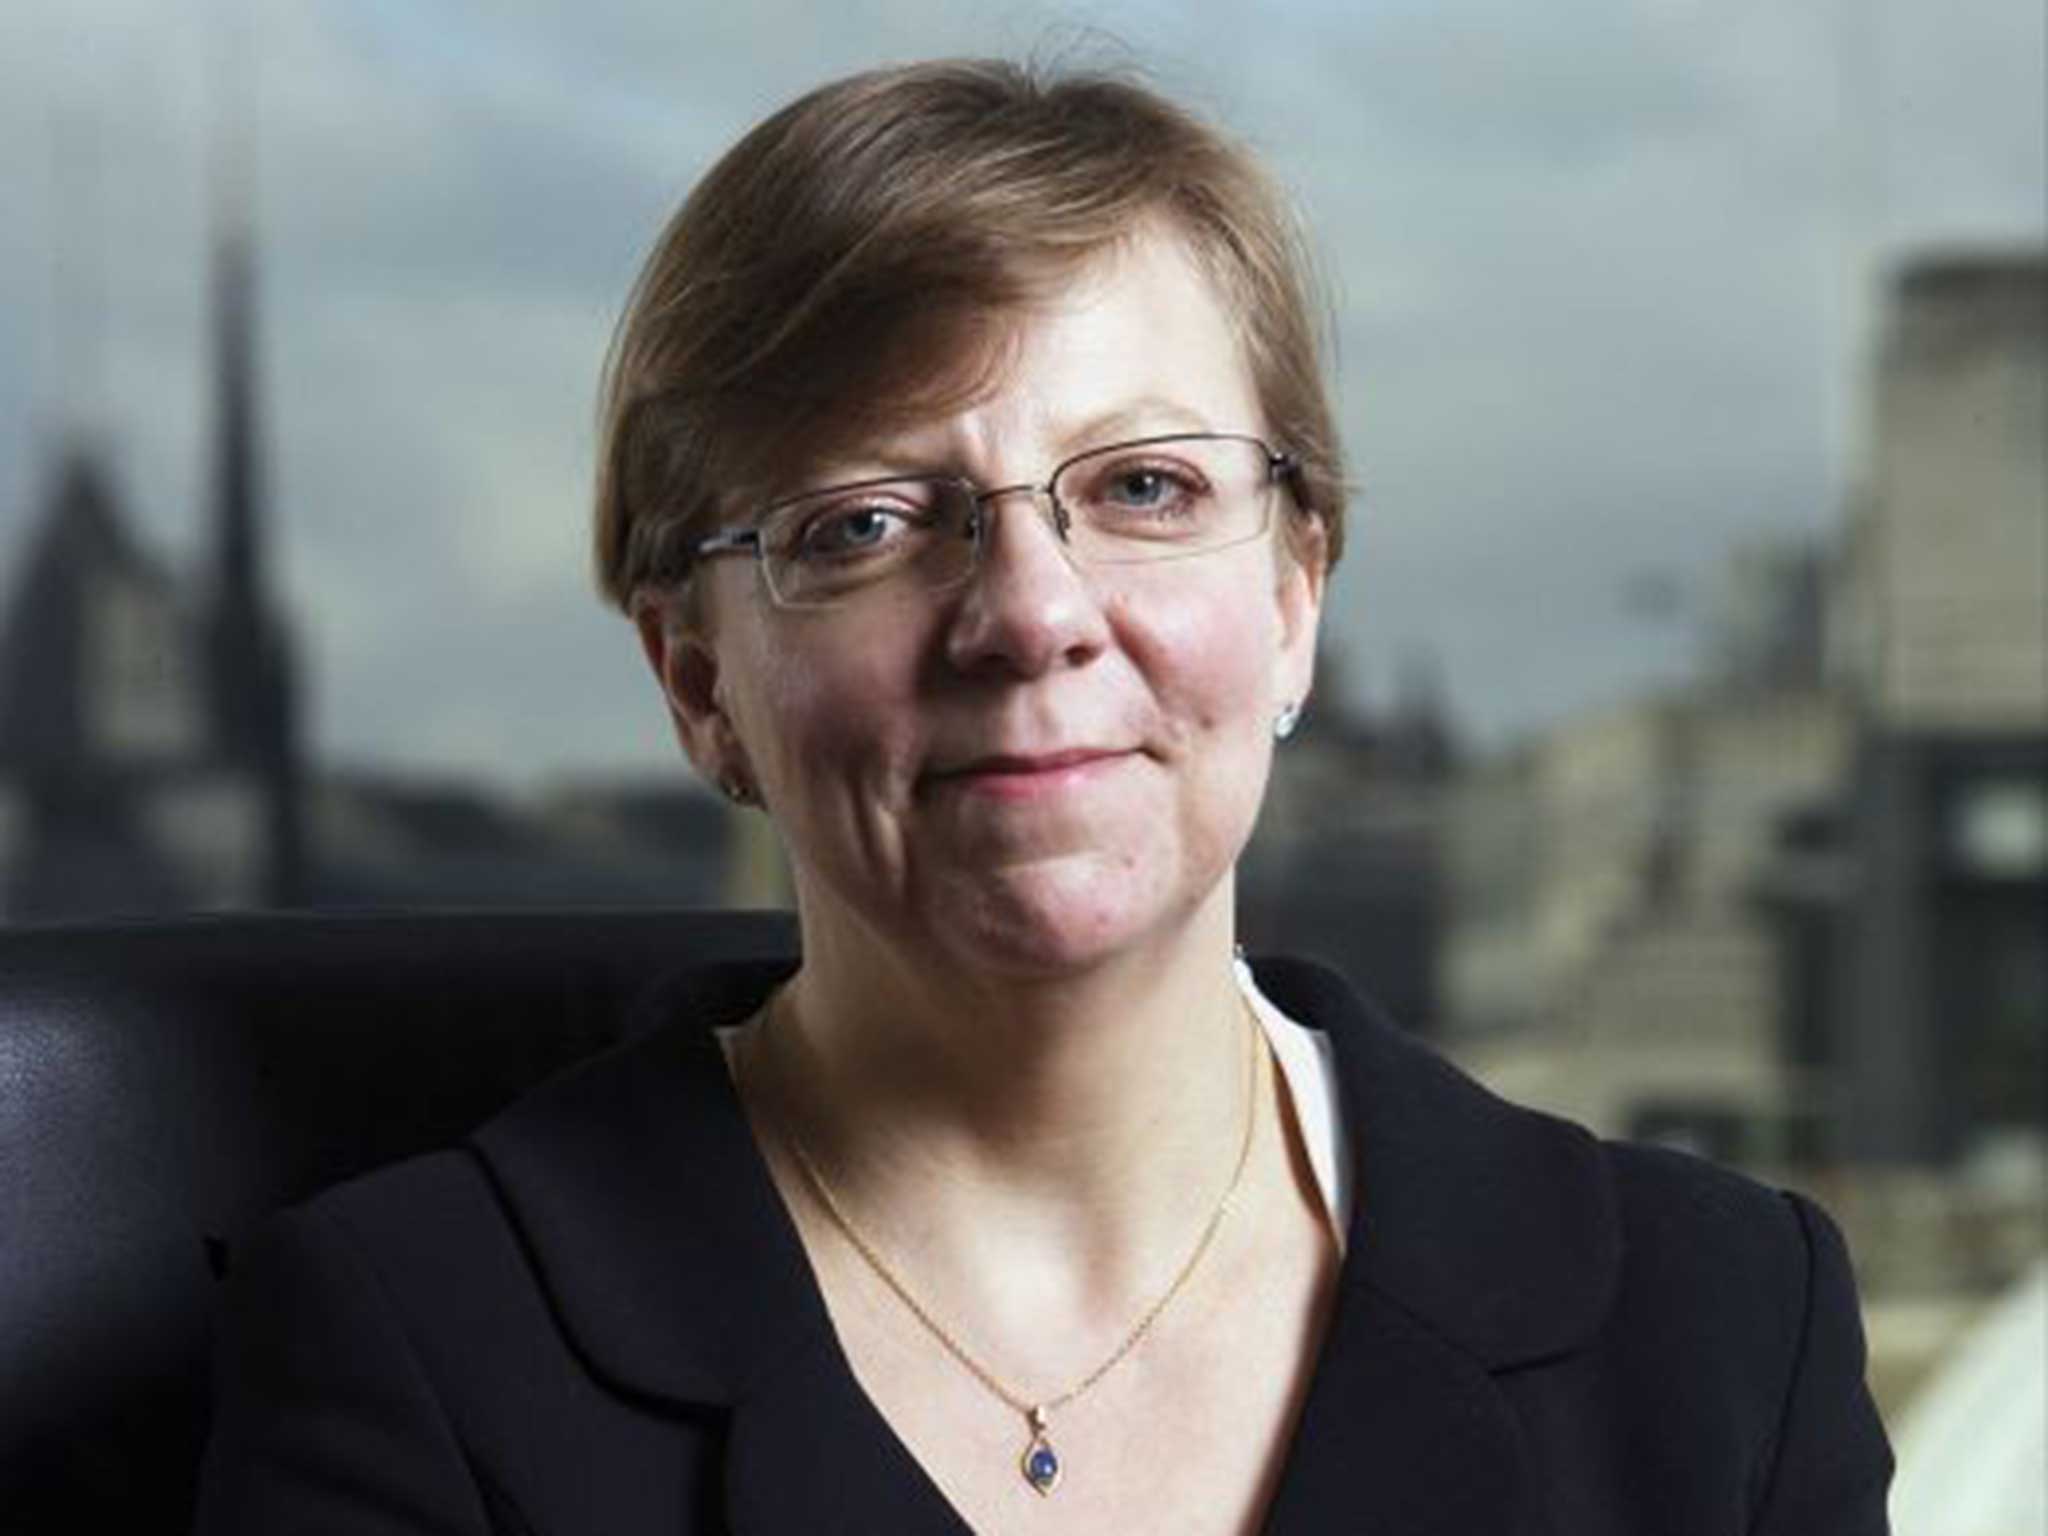 Alison Saunders maintains there was enough evidence to bring the case